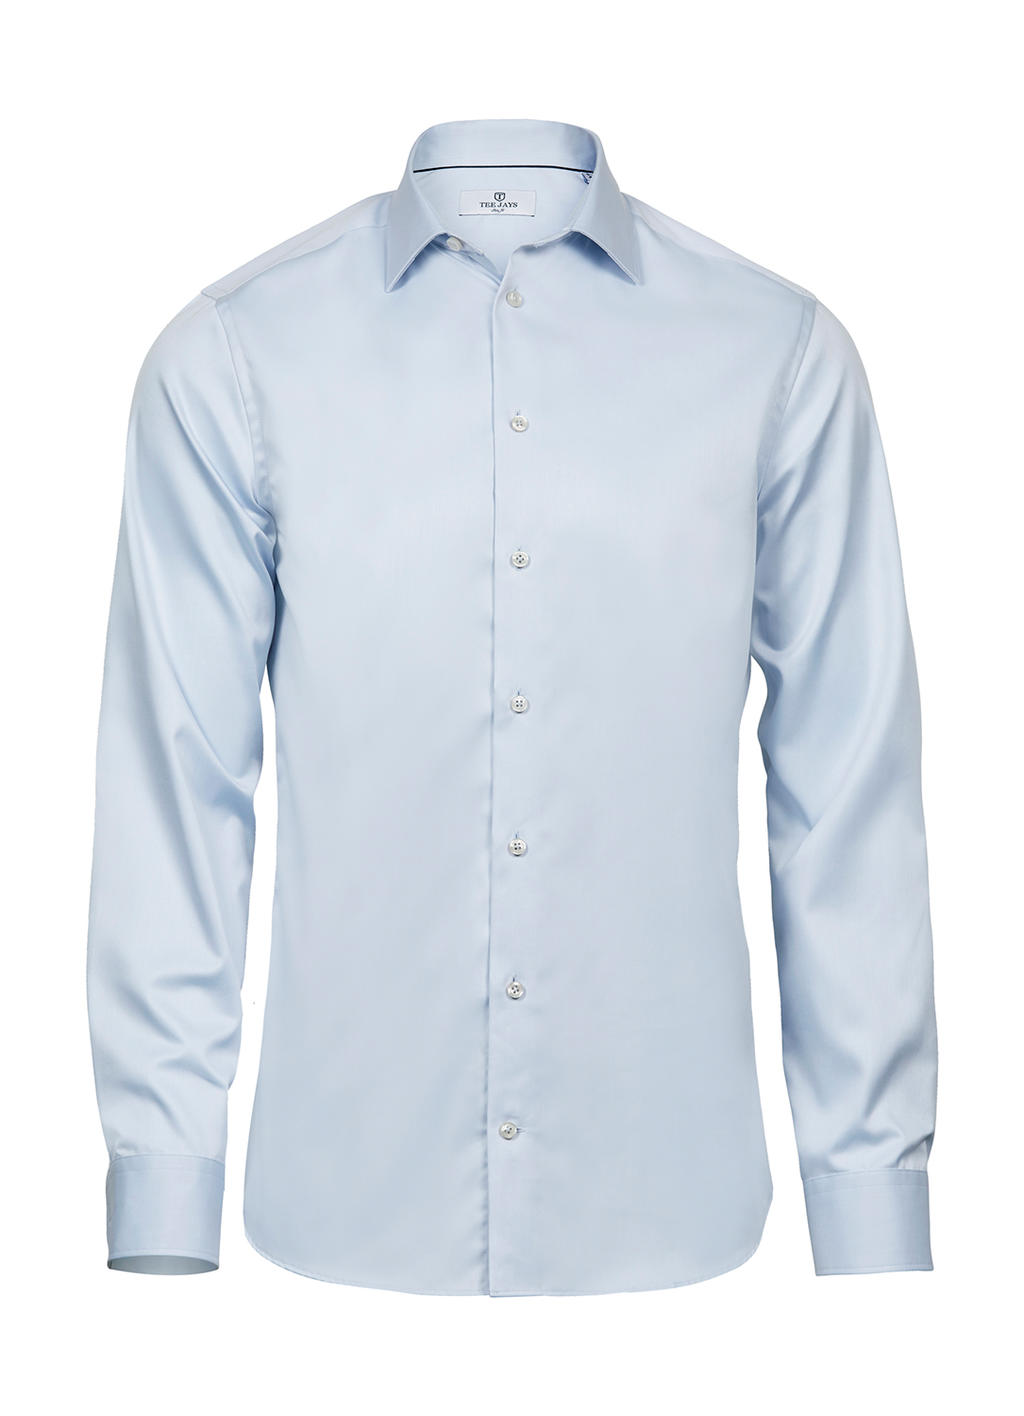  Luxury Shirt Slim Fit in Farbe Light Blue